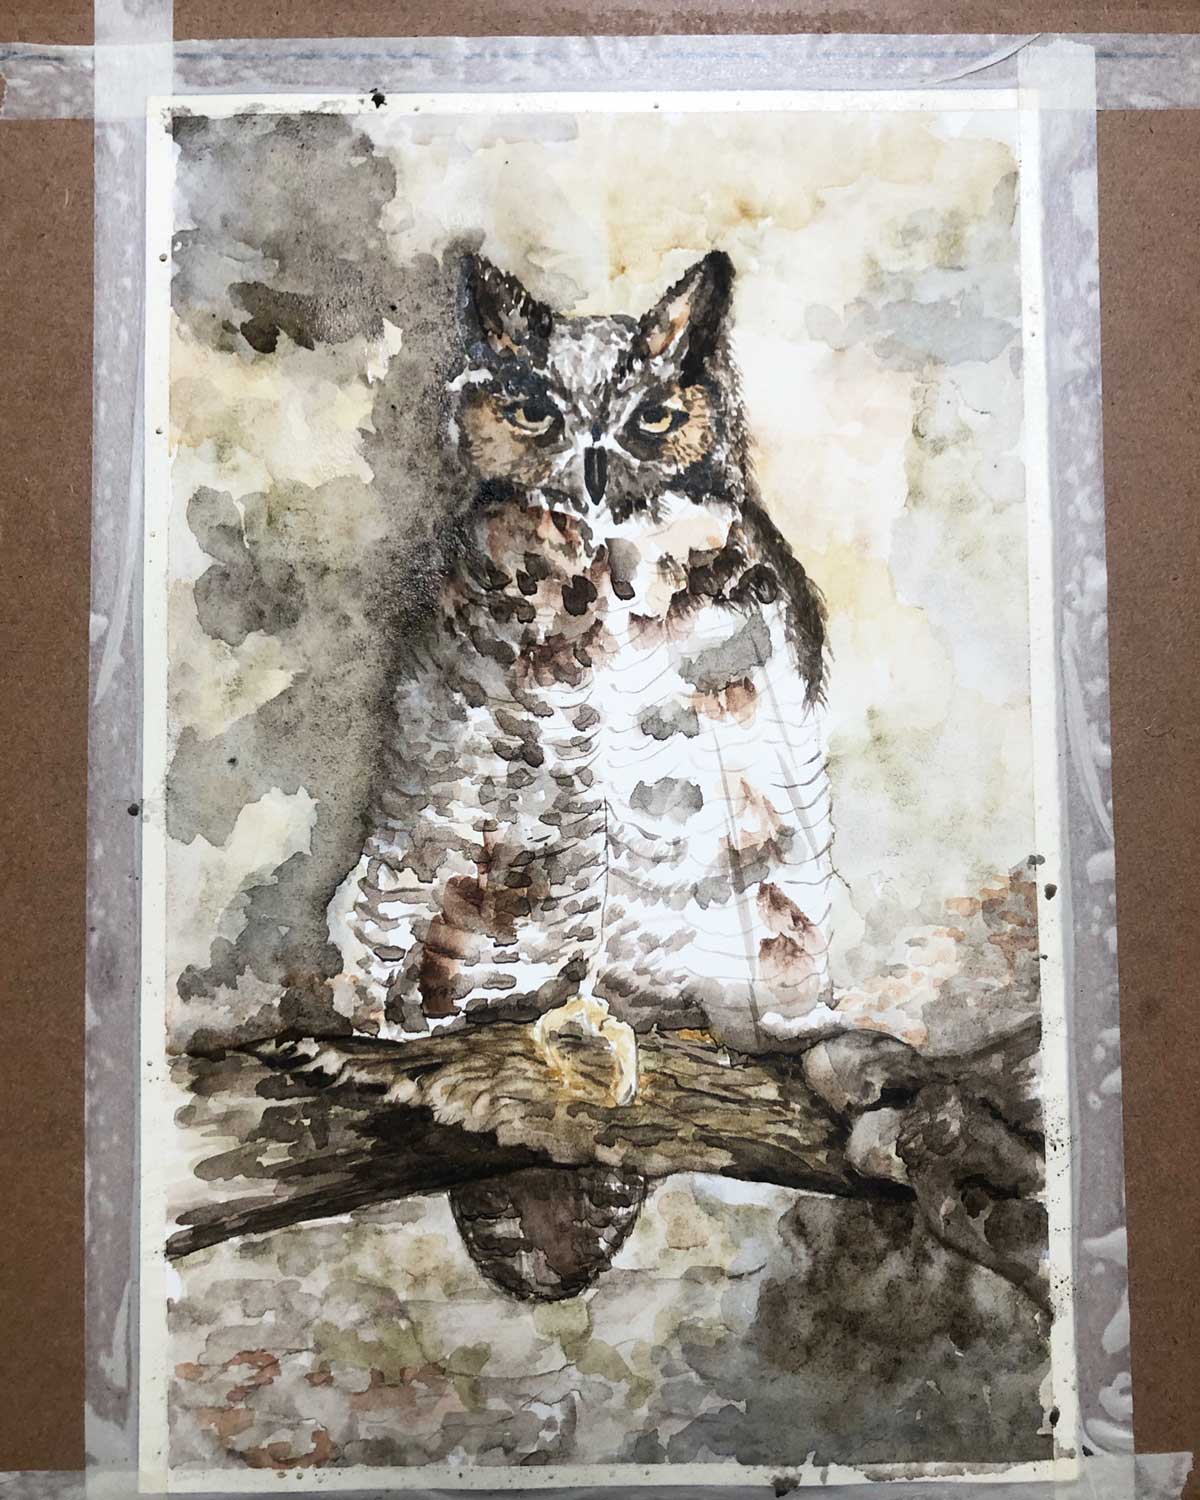 Making progress on my painting of a great horned owl.